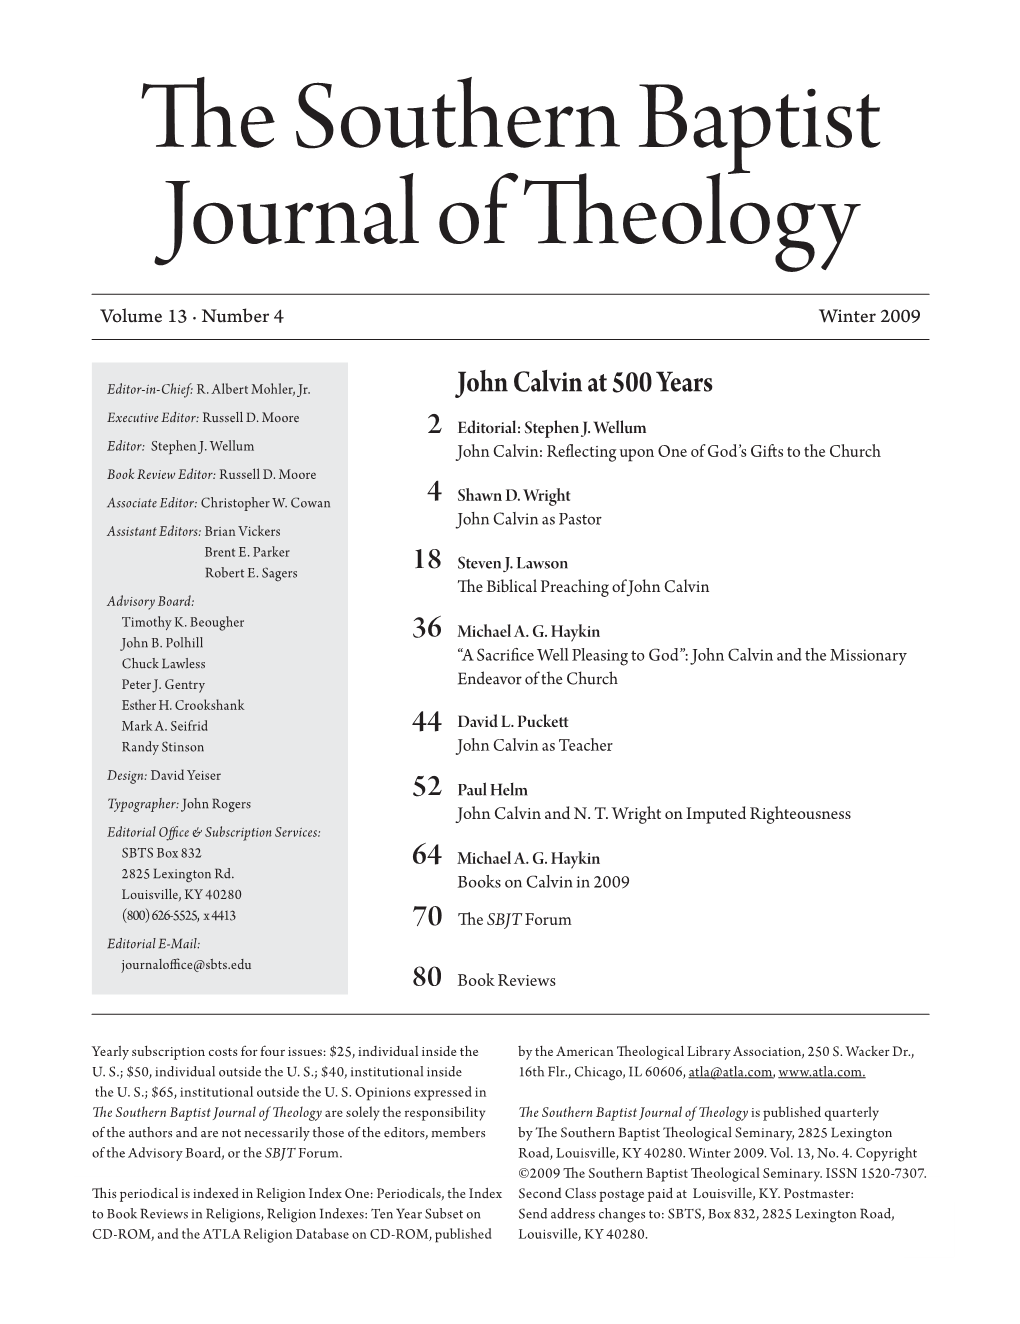 The Southern Baptist Journal of Theology